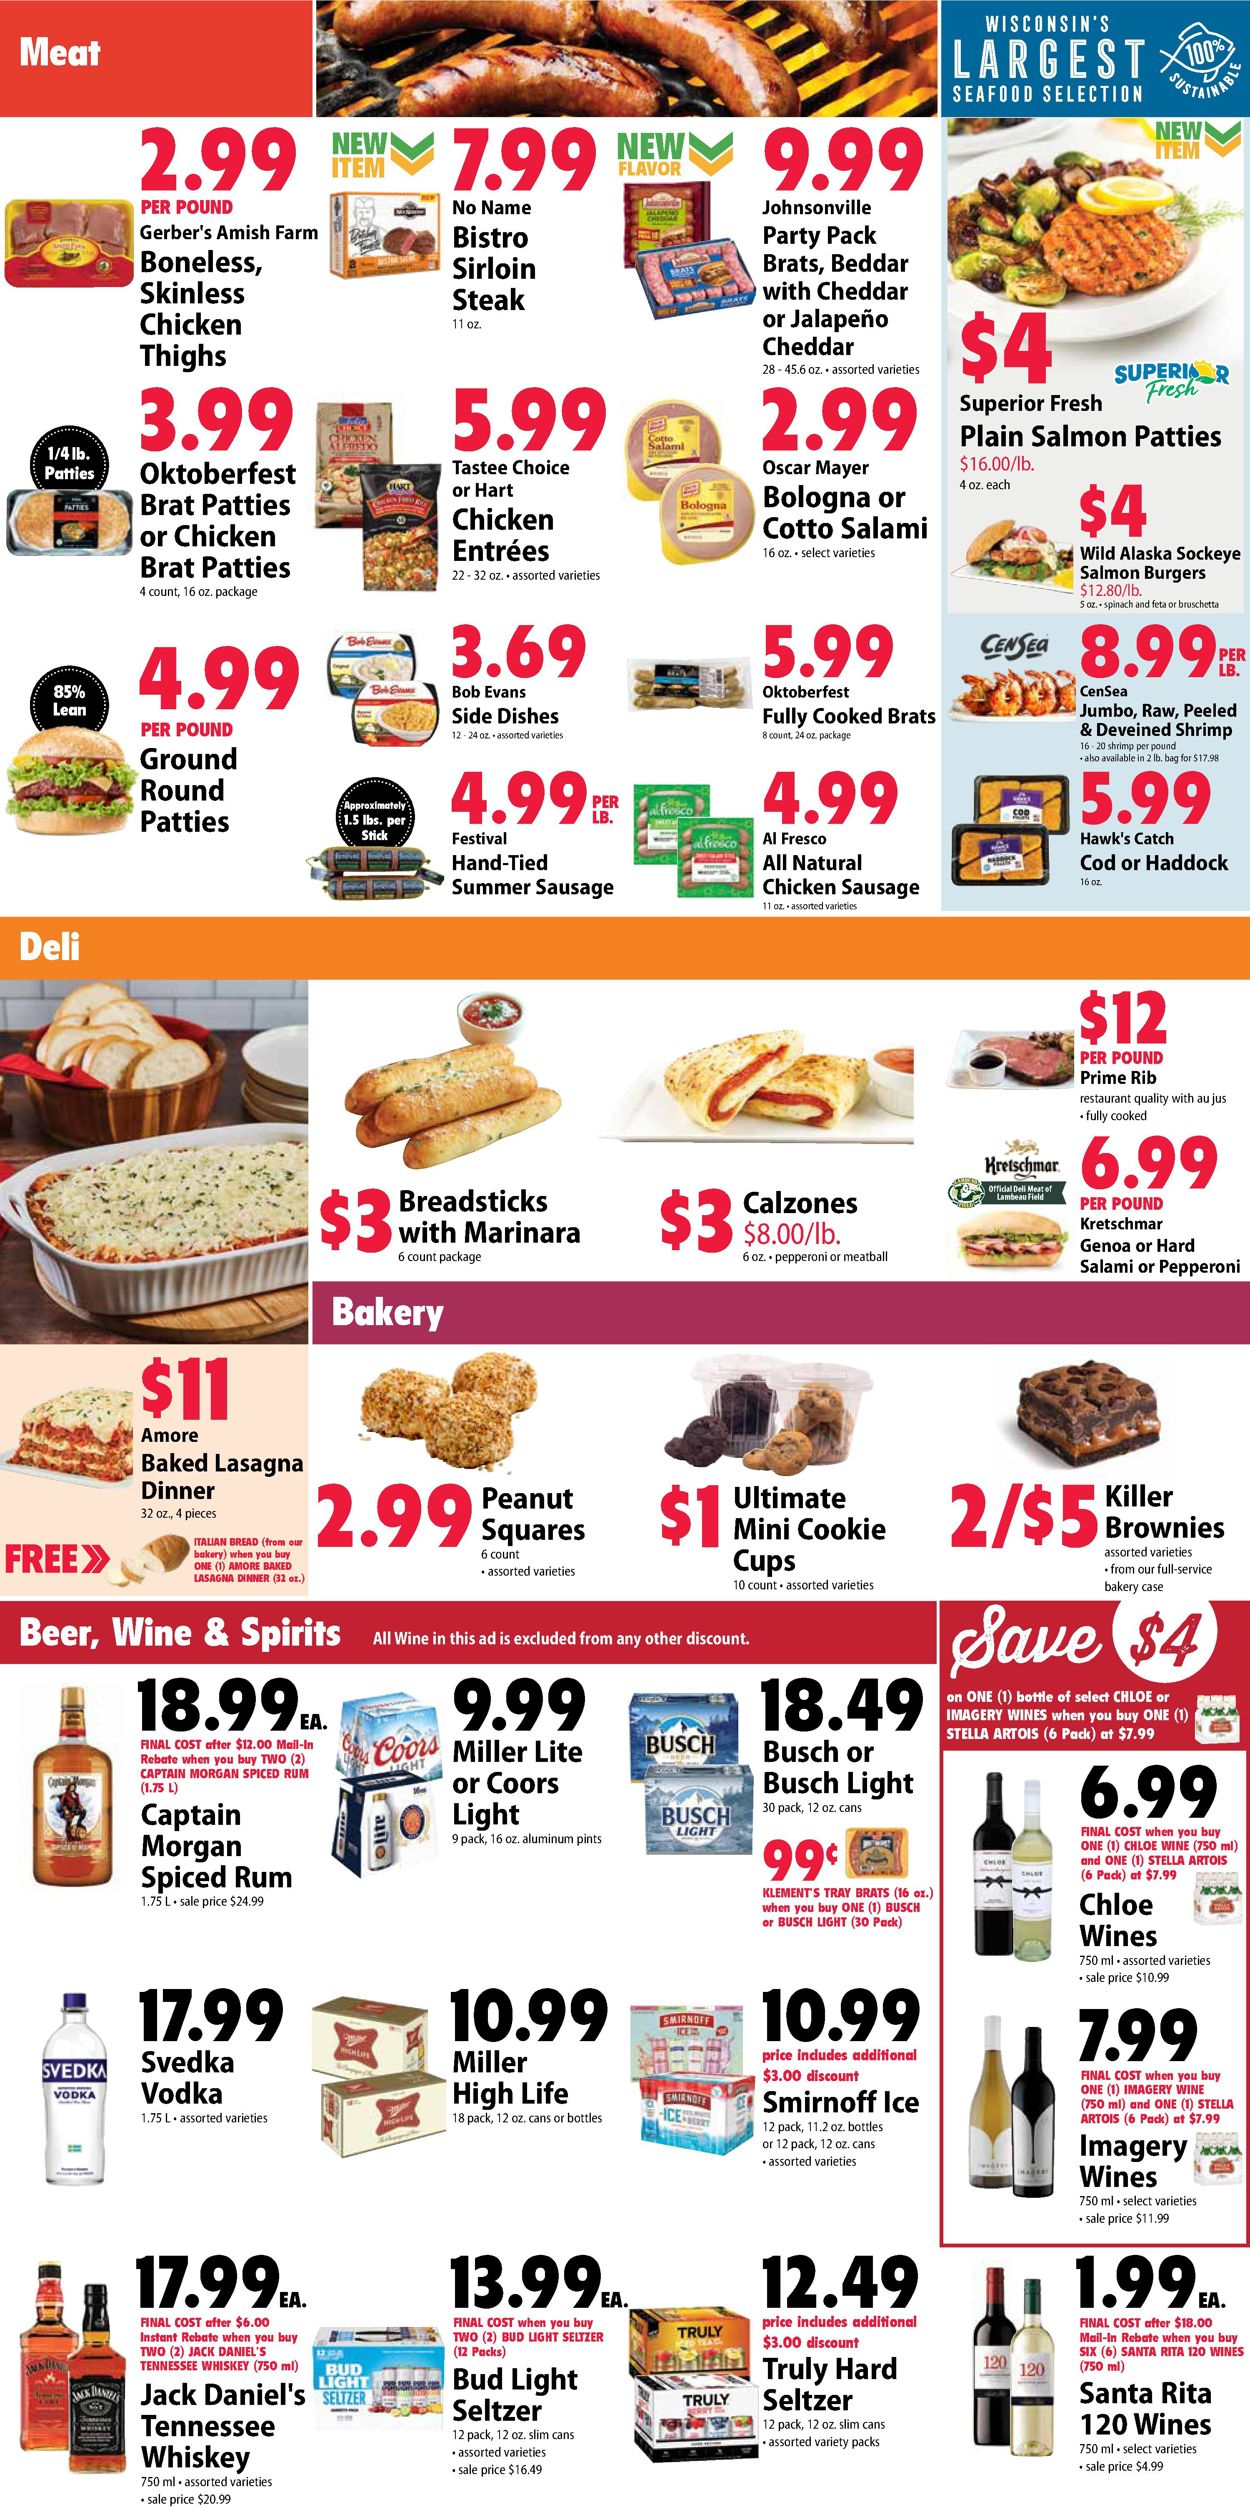 Festival Foods Current weekly ad 08/04 08/10/2021 [2]